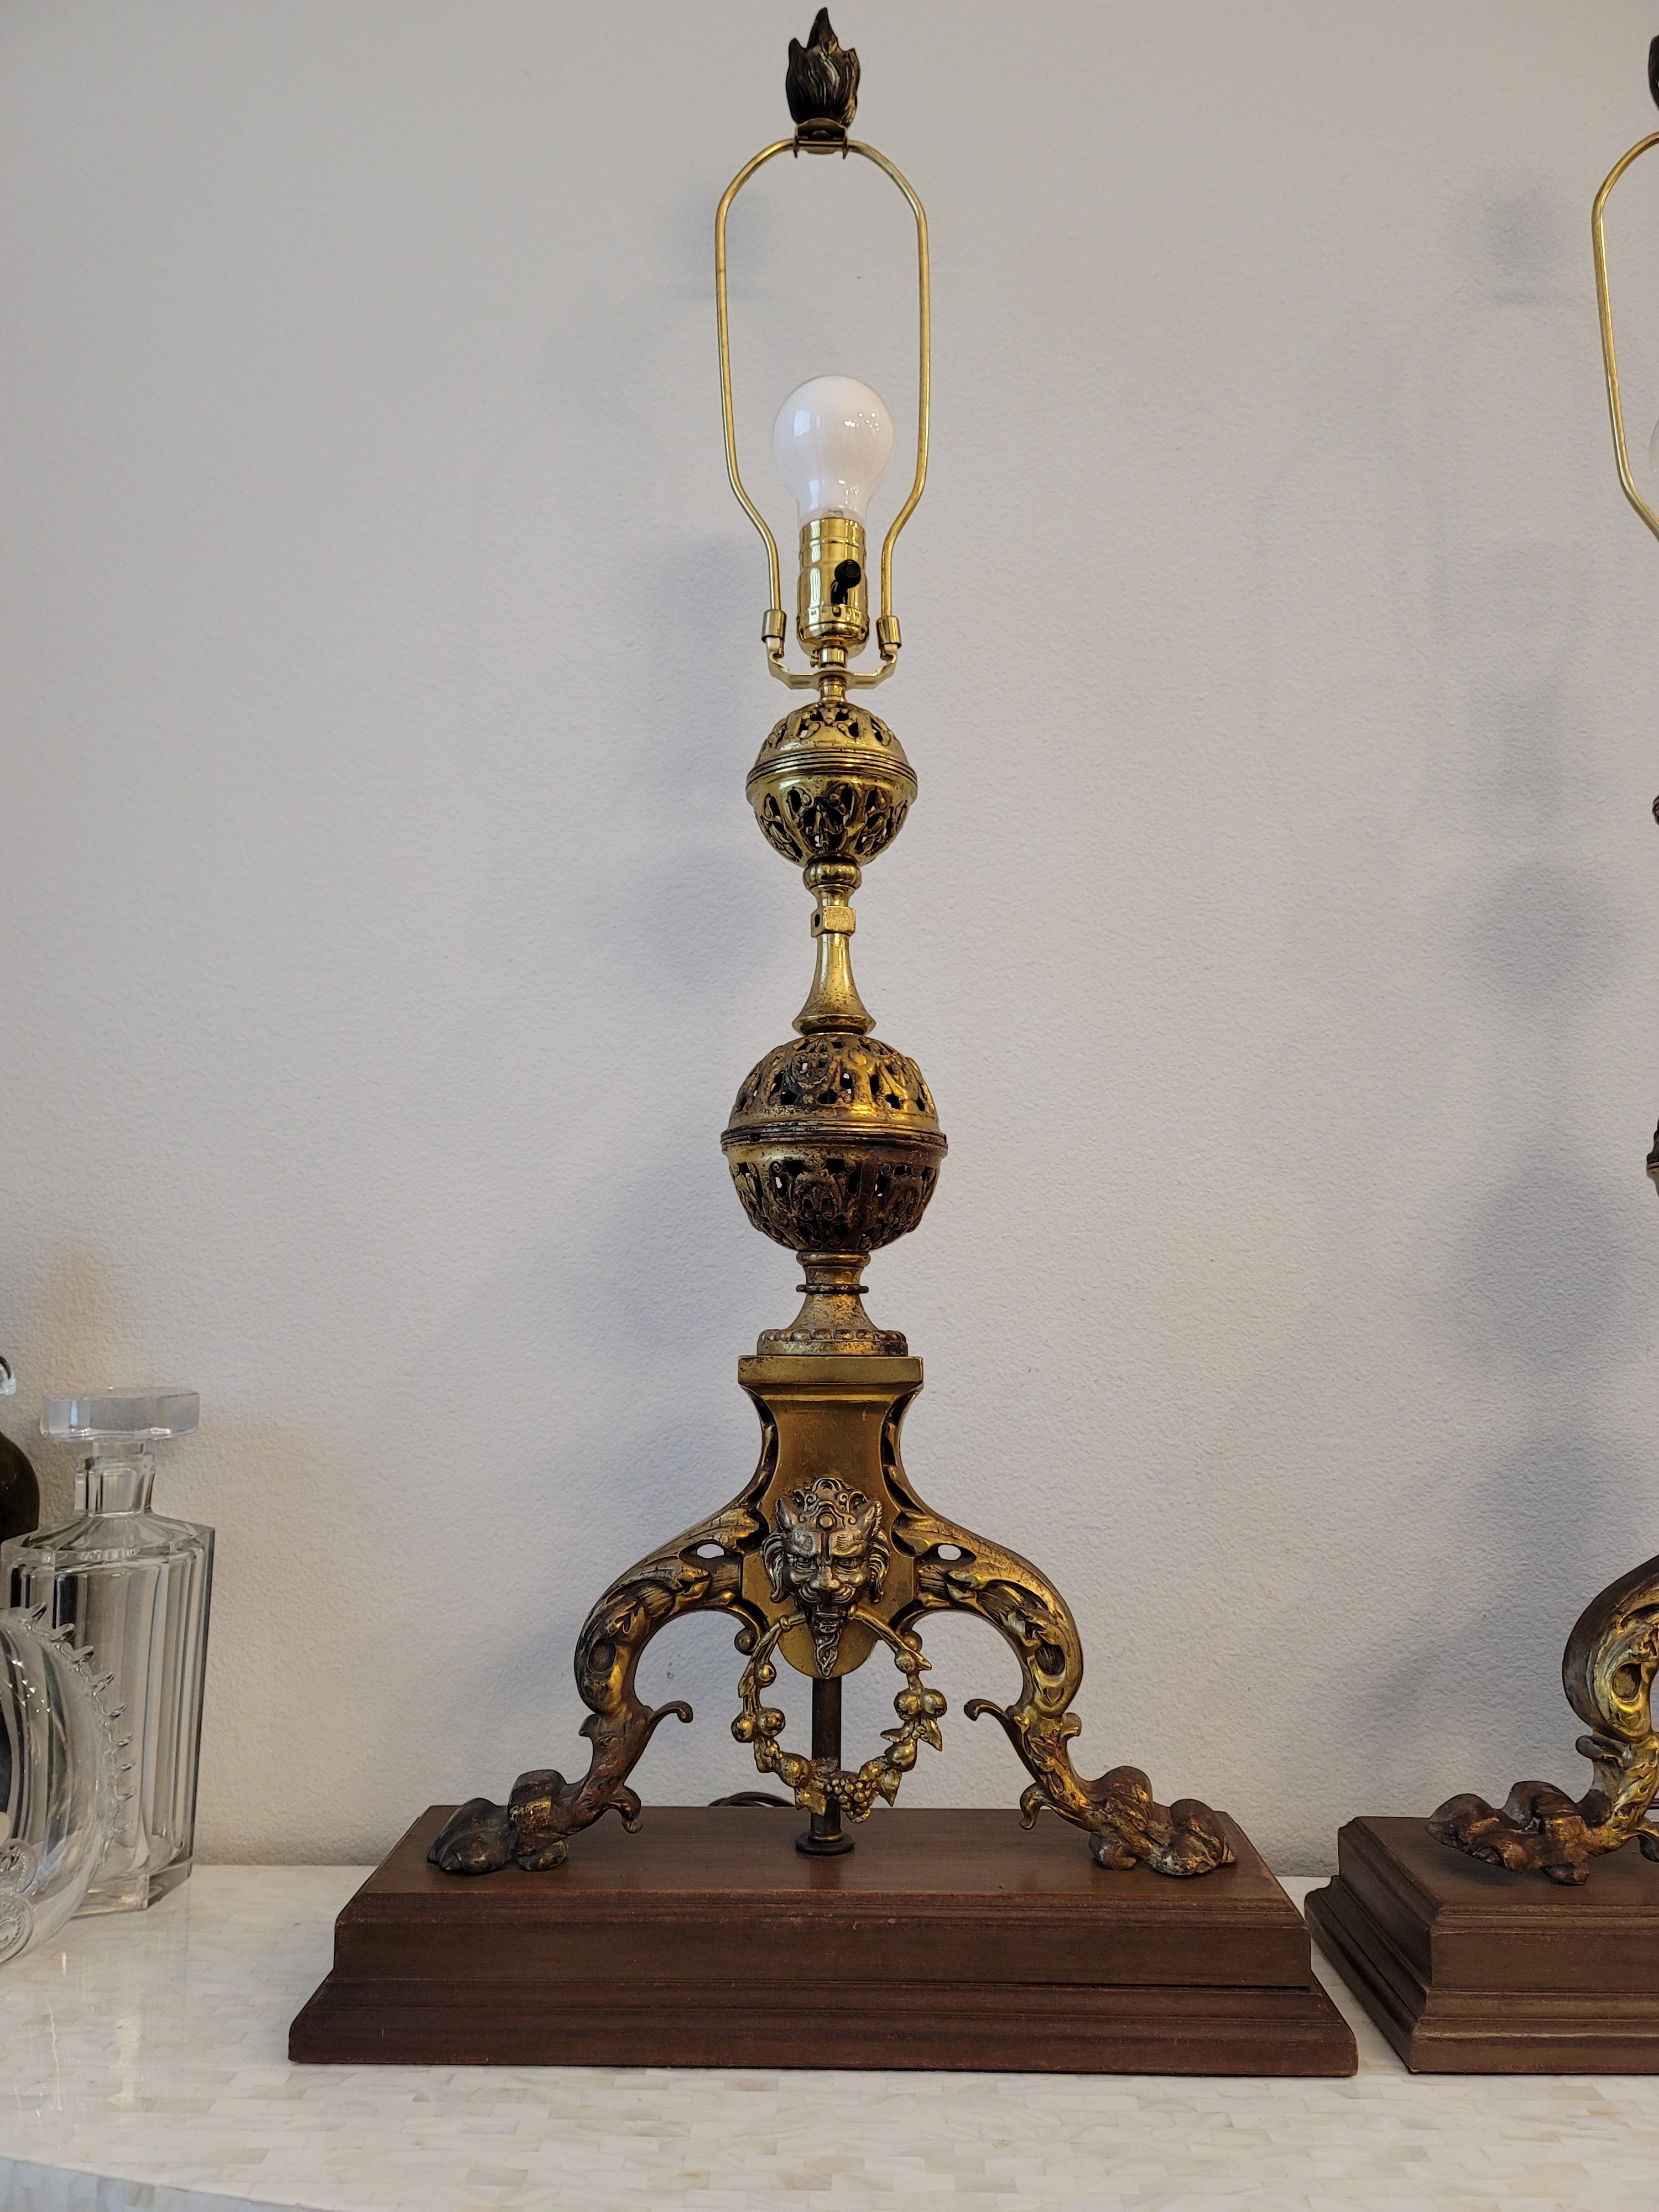 19th Century French Gothic Revival Andirons Mounted As Table Lamps - A Pair  For Sale 8